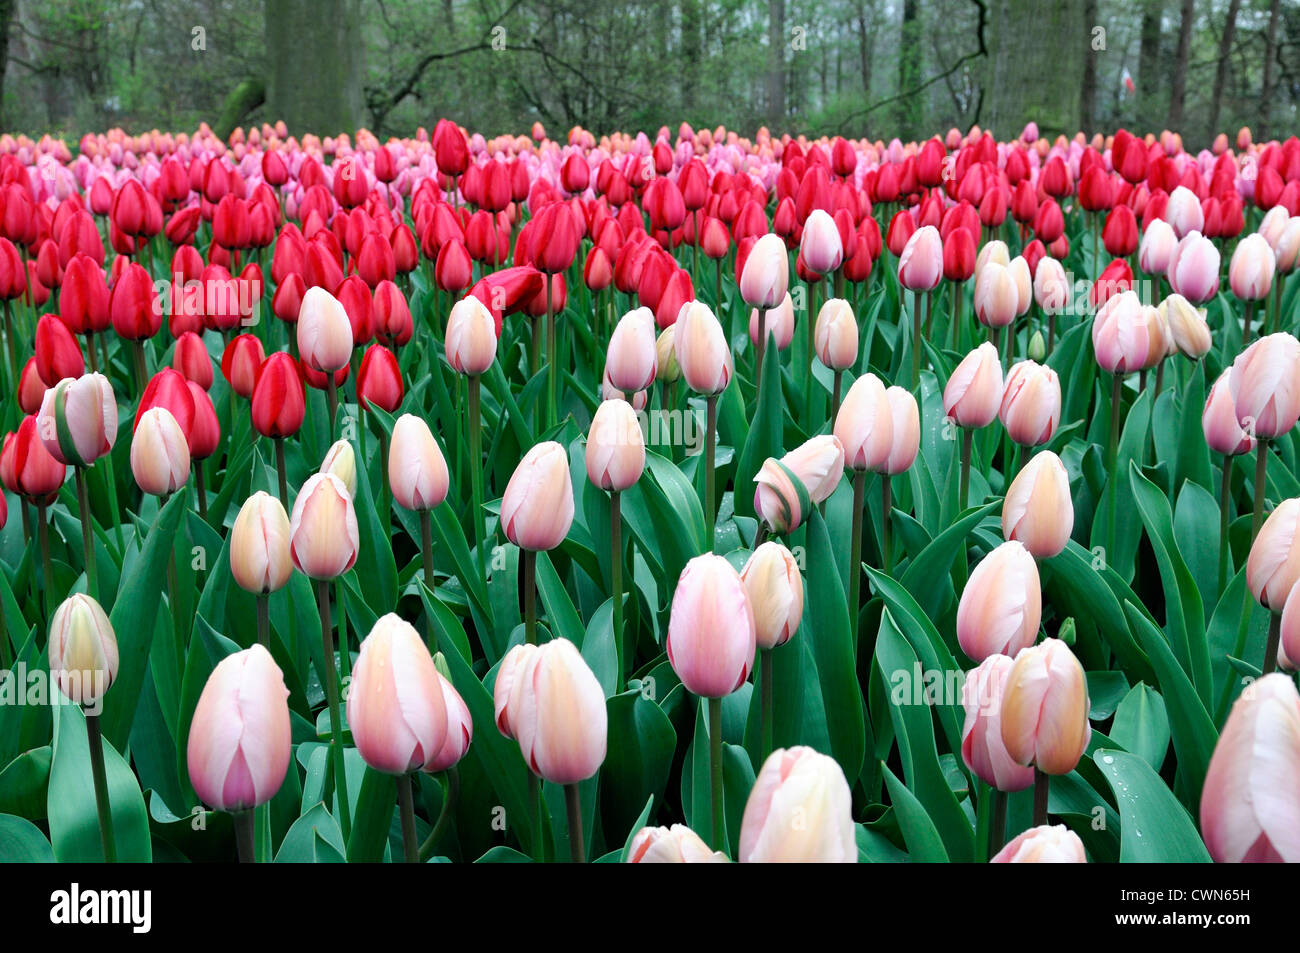 Tulipa salmon impression Tulipa red impression darwin hybrid pale pink tulip flowers spring flower bloom blossom mixed bed Stock Photo